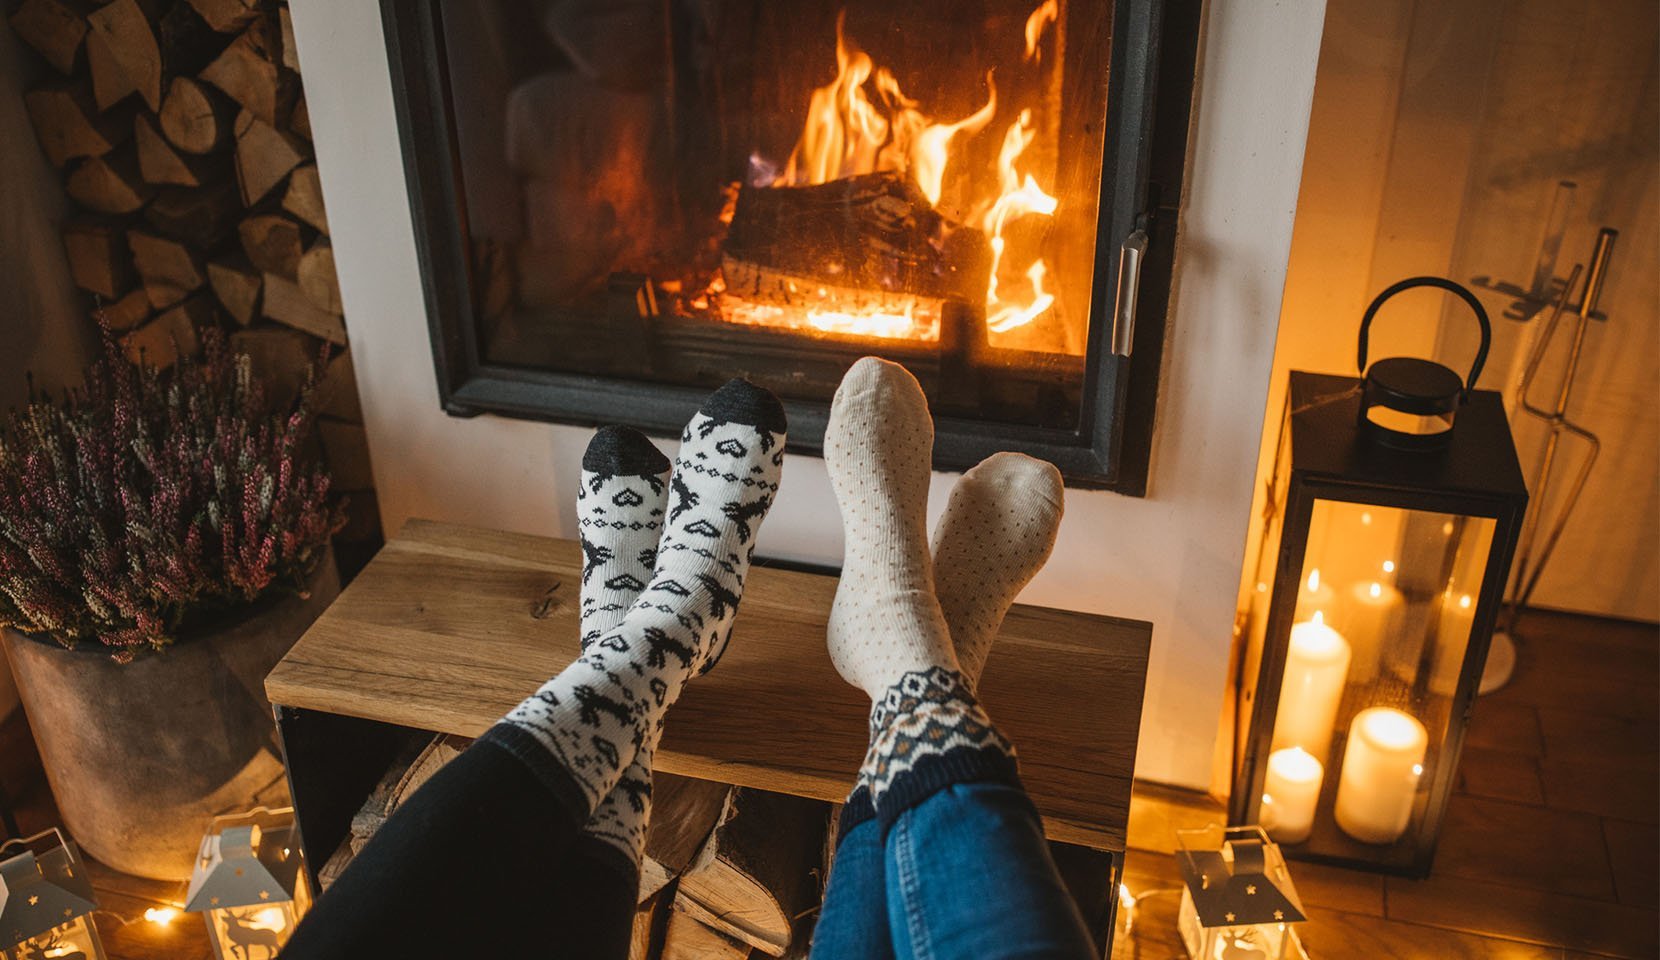 A couple warms their feet by the fireplace